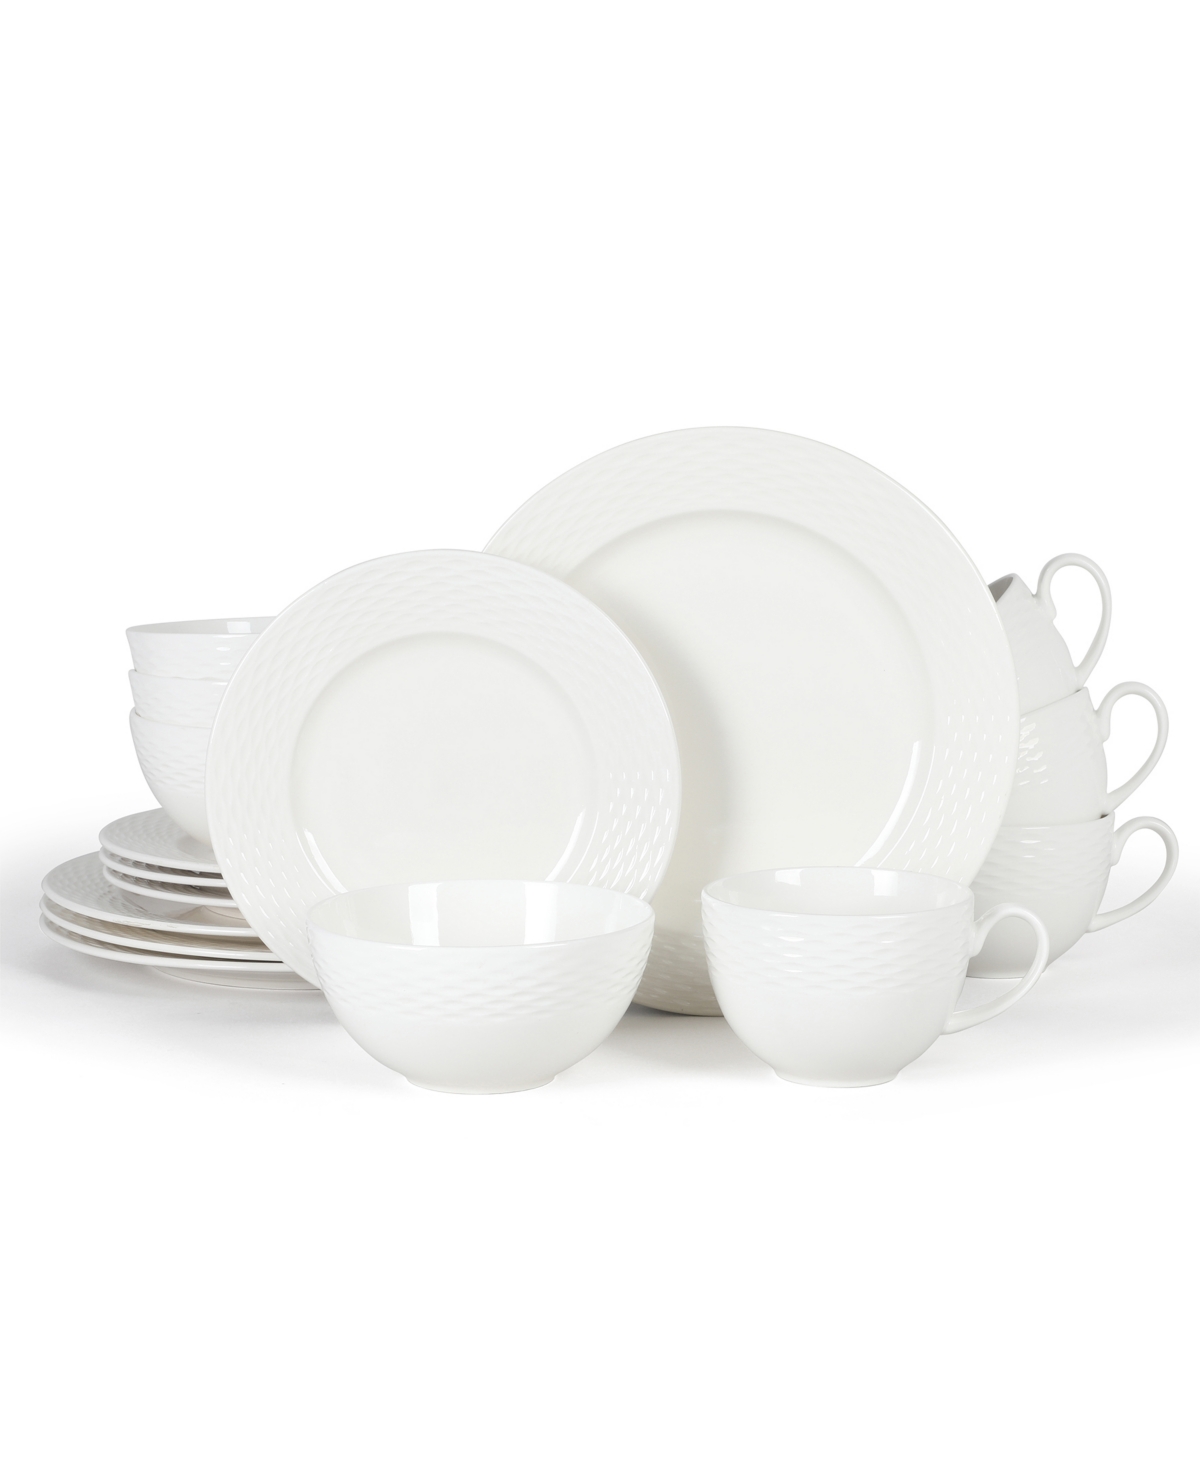 Maepoole Embossed 16 Piece Dinnerware Set, Service for 4 - White